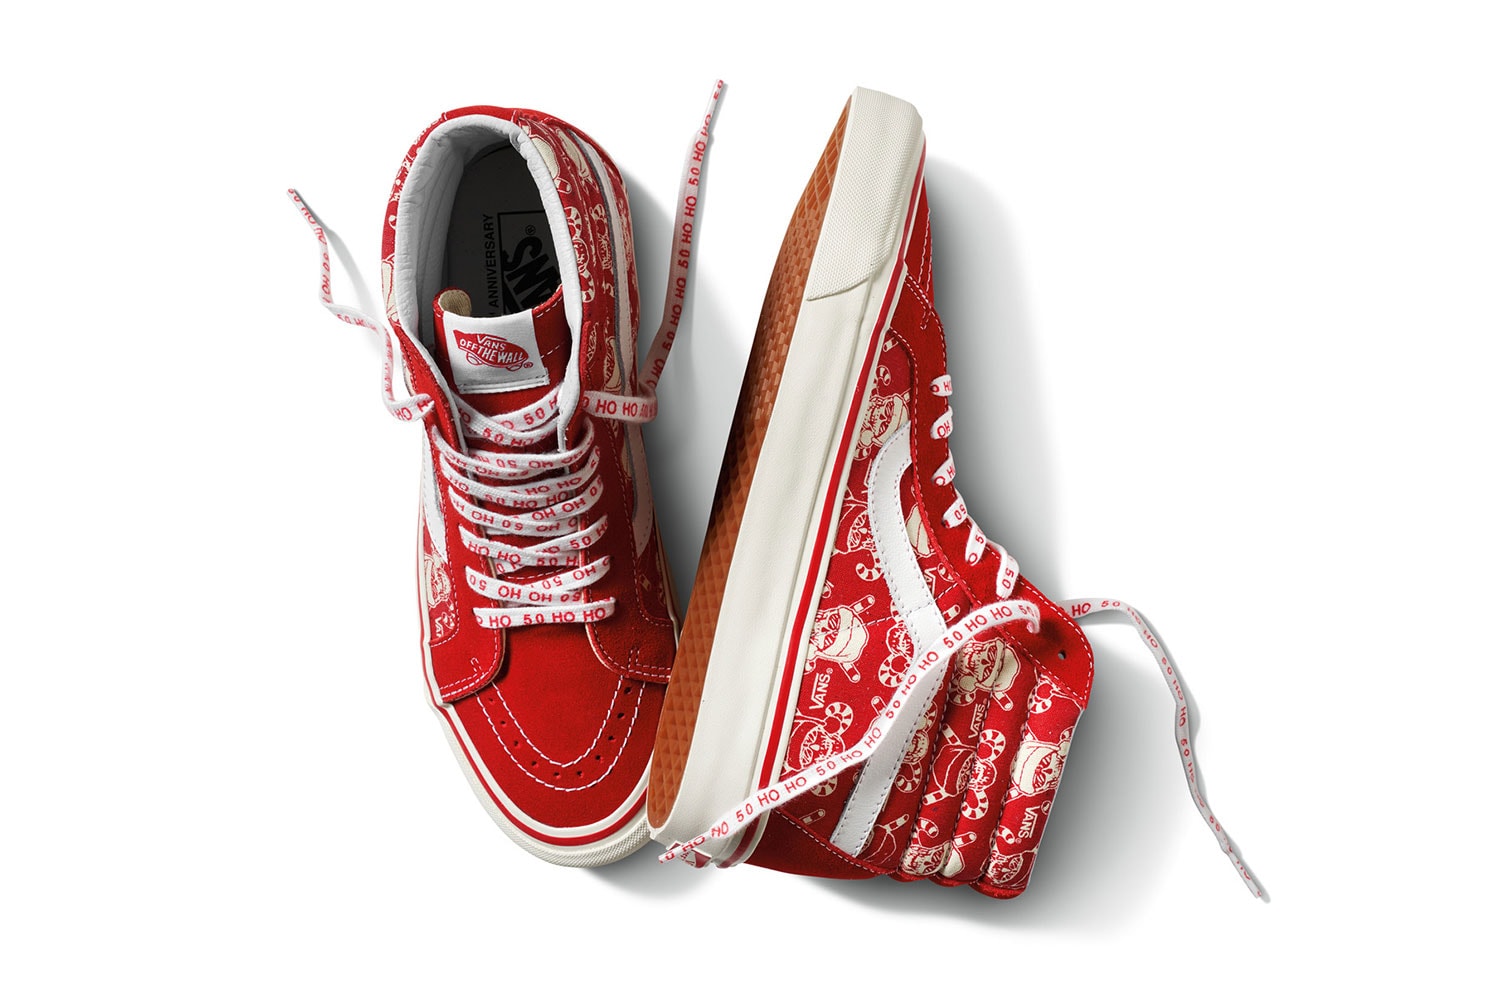 Vans 2016 Holiday Collection Sk8-Hi and Old Skool